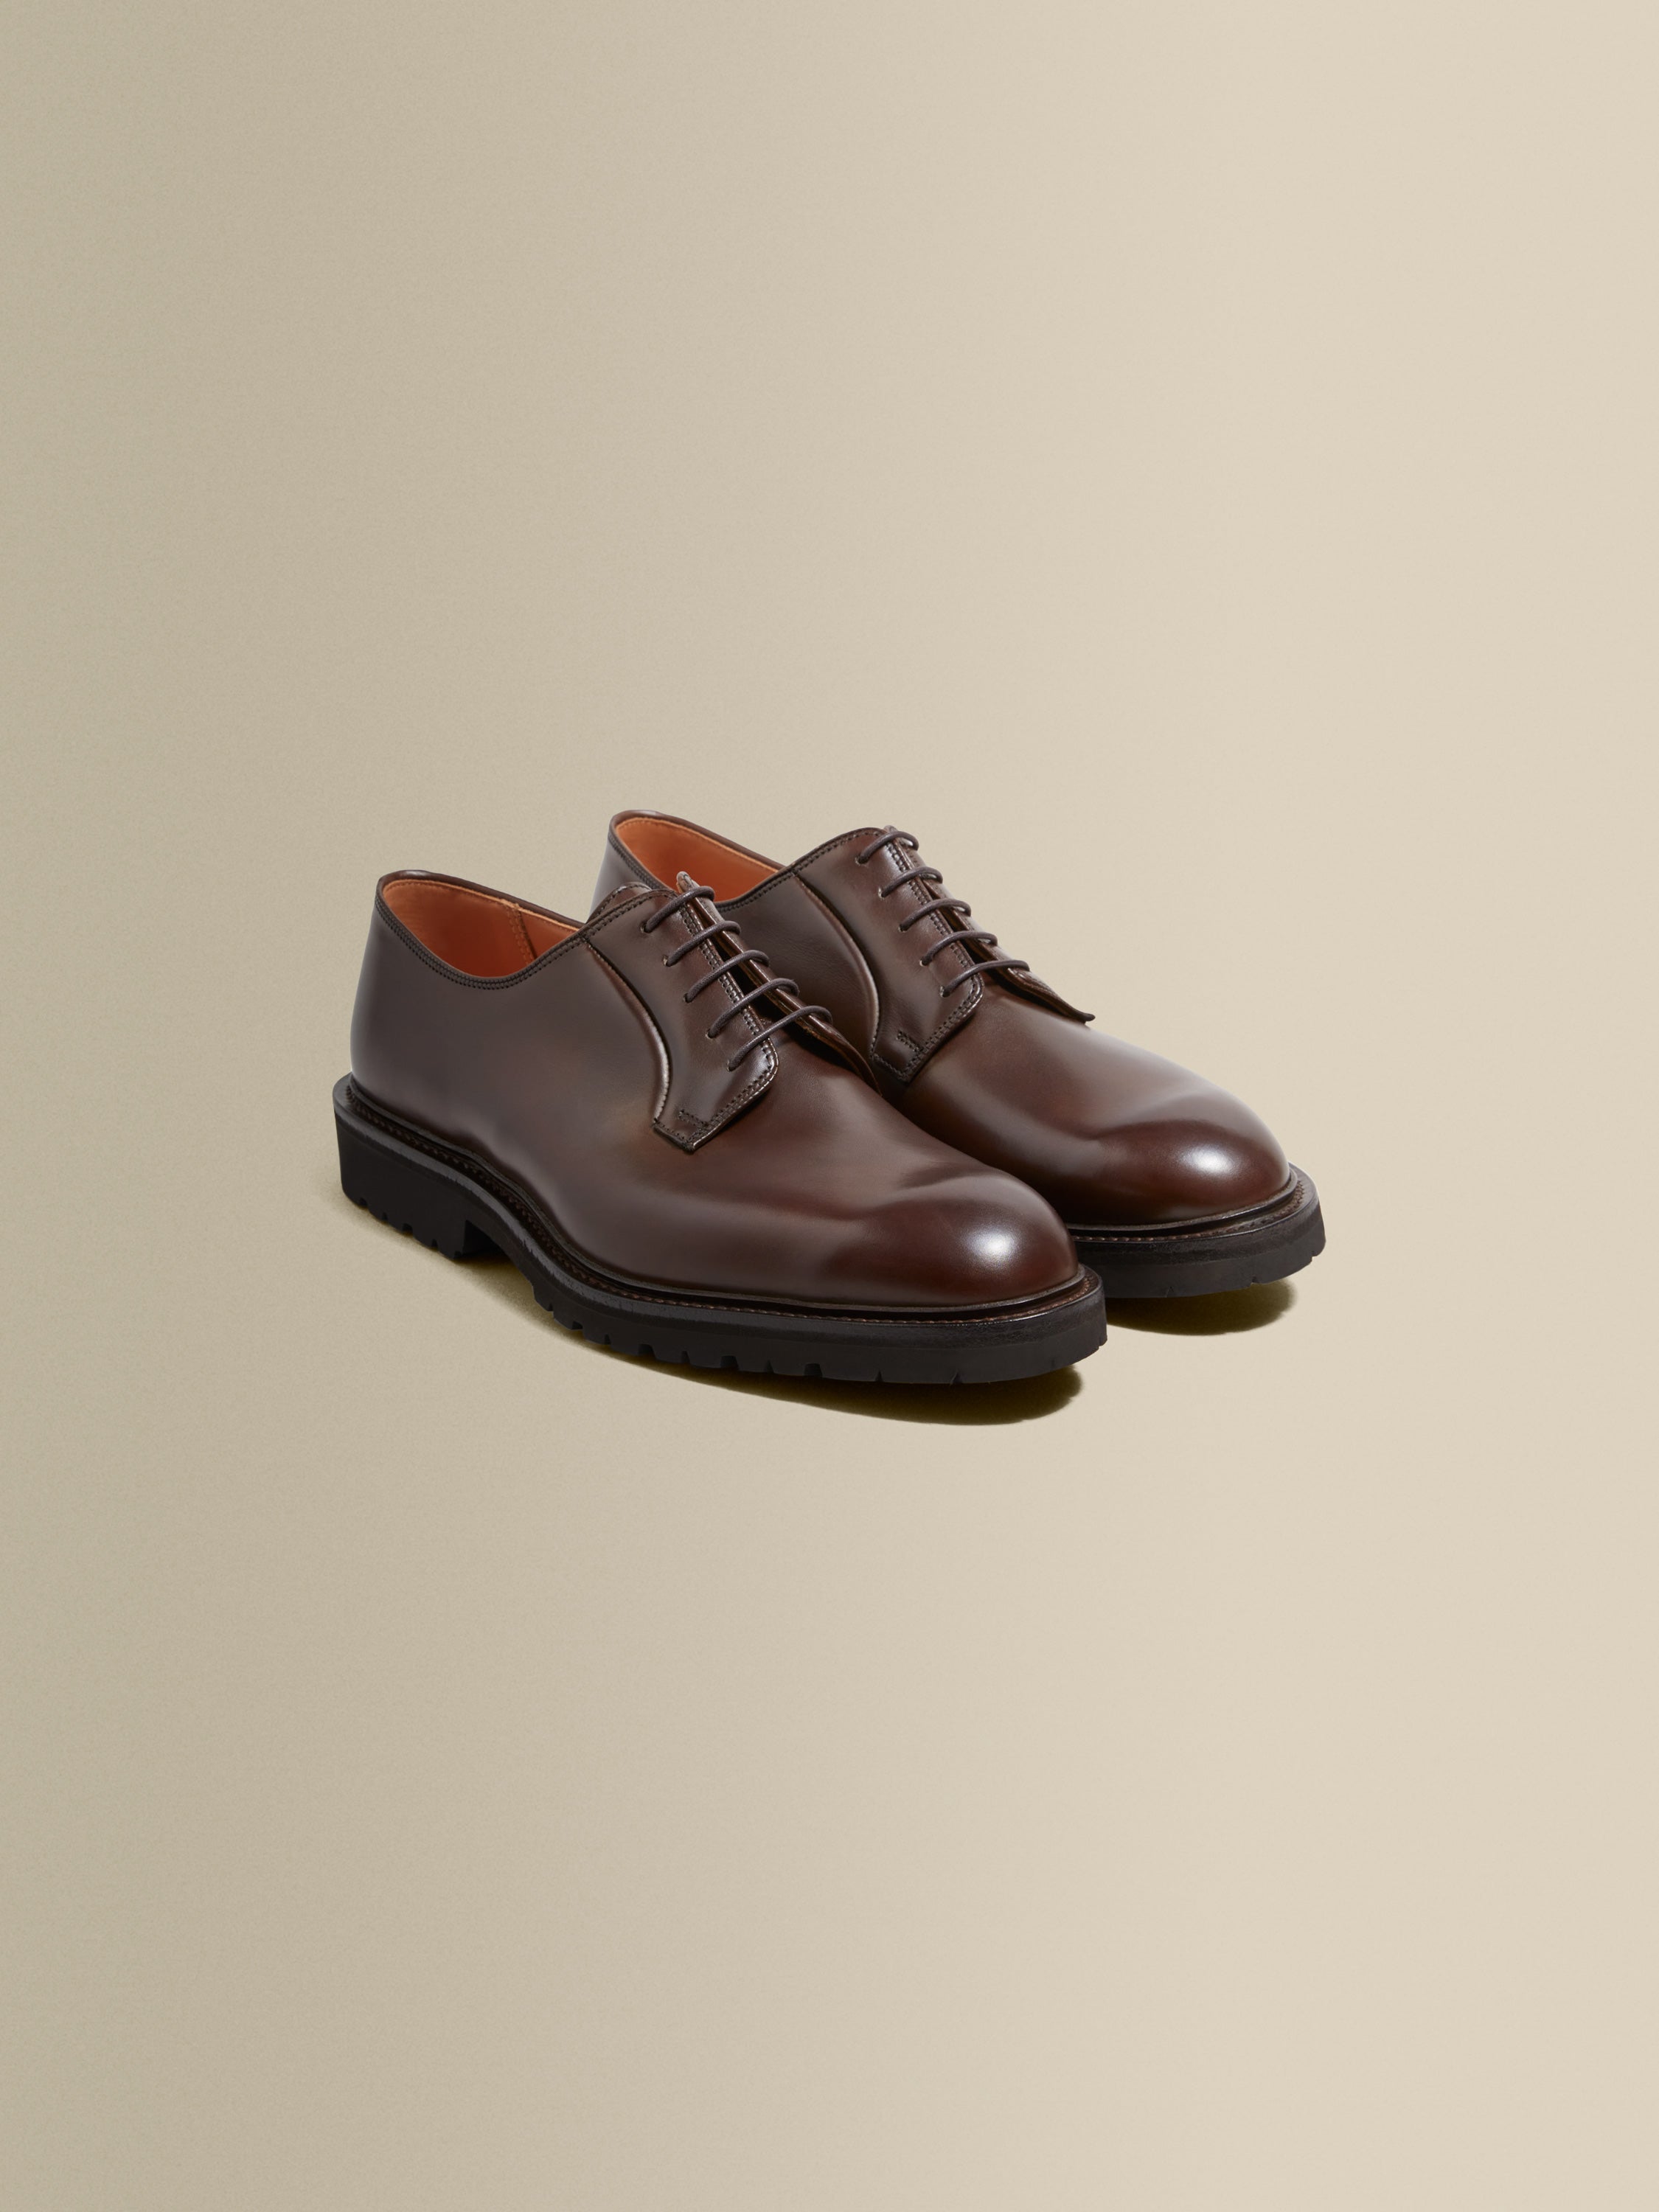 Calf Leather Derby Shoes Dark Coffee Pair Product Image